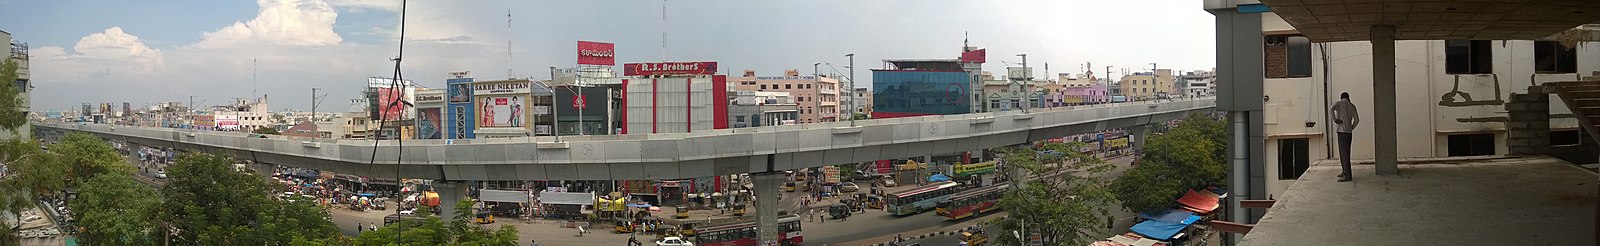 A view of Dilsukhnagar, one of the largest commercial and residential centers in Hyderabad.